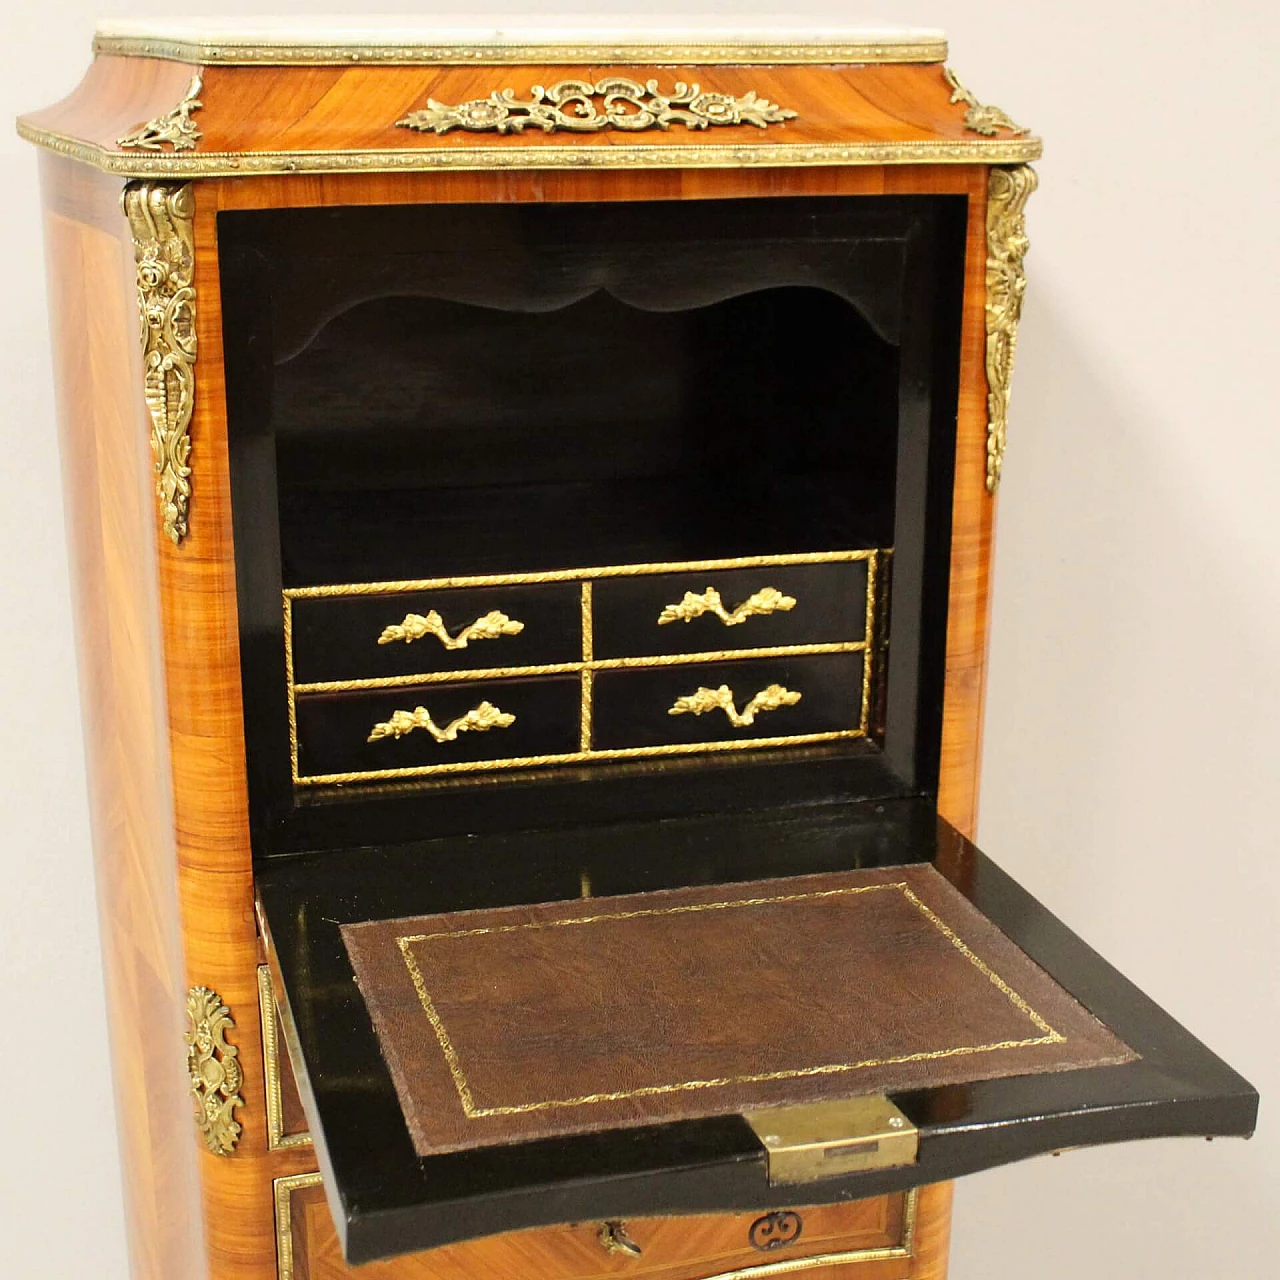 Napoleon III secretaire in bois de rose, rosewood inlay and gilded bronze with marble top, 19th century 2